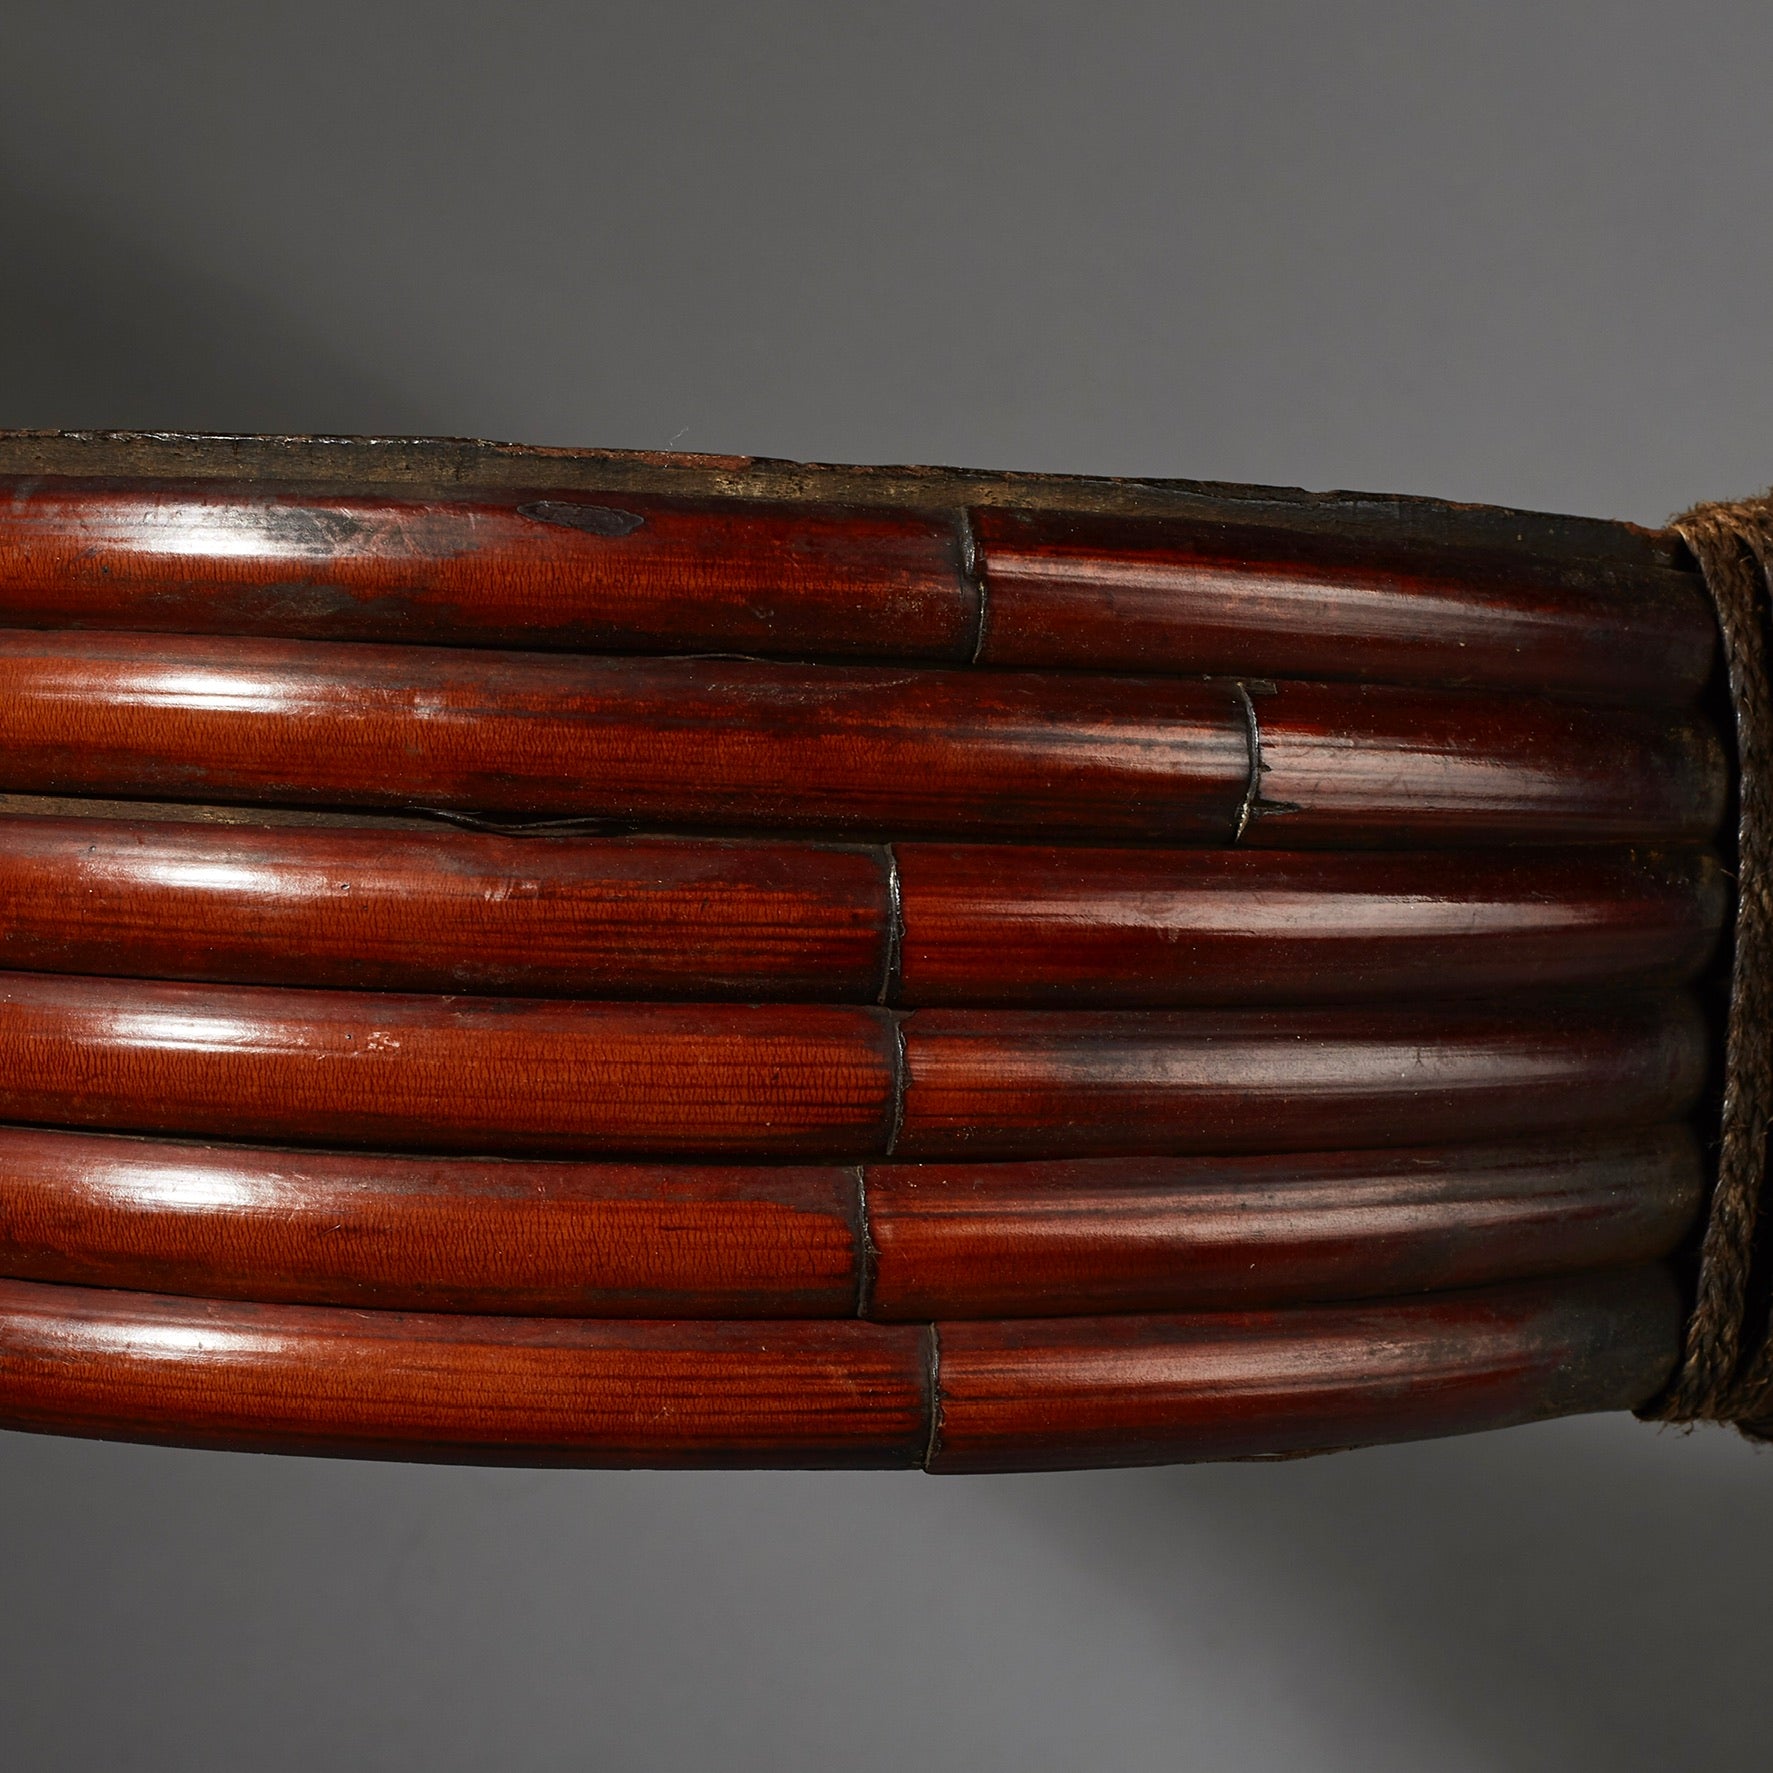 AN OLD BAMBOO BELT FROM PAPUA NEW GUINEA (No 2655)